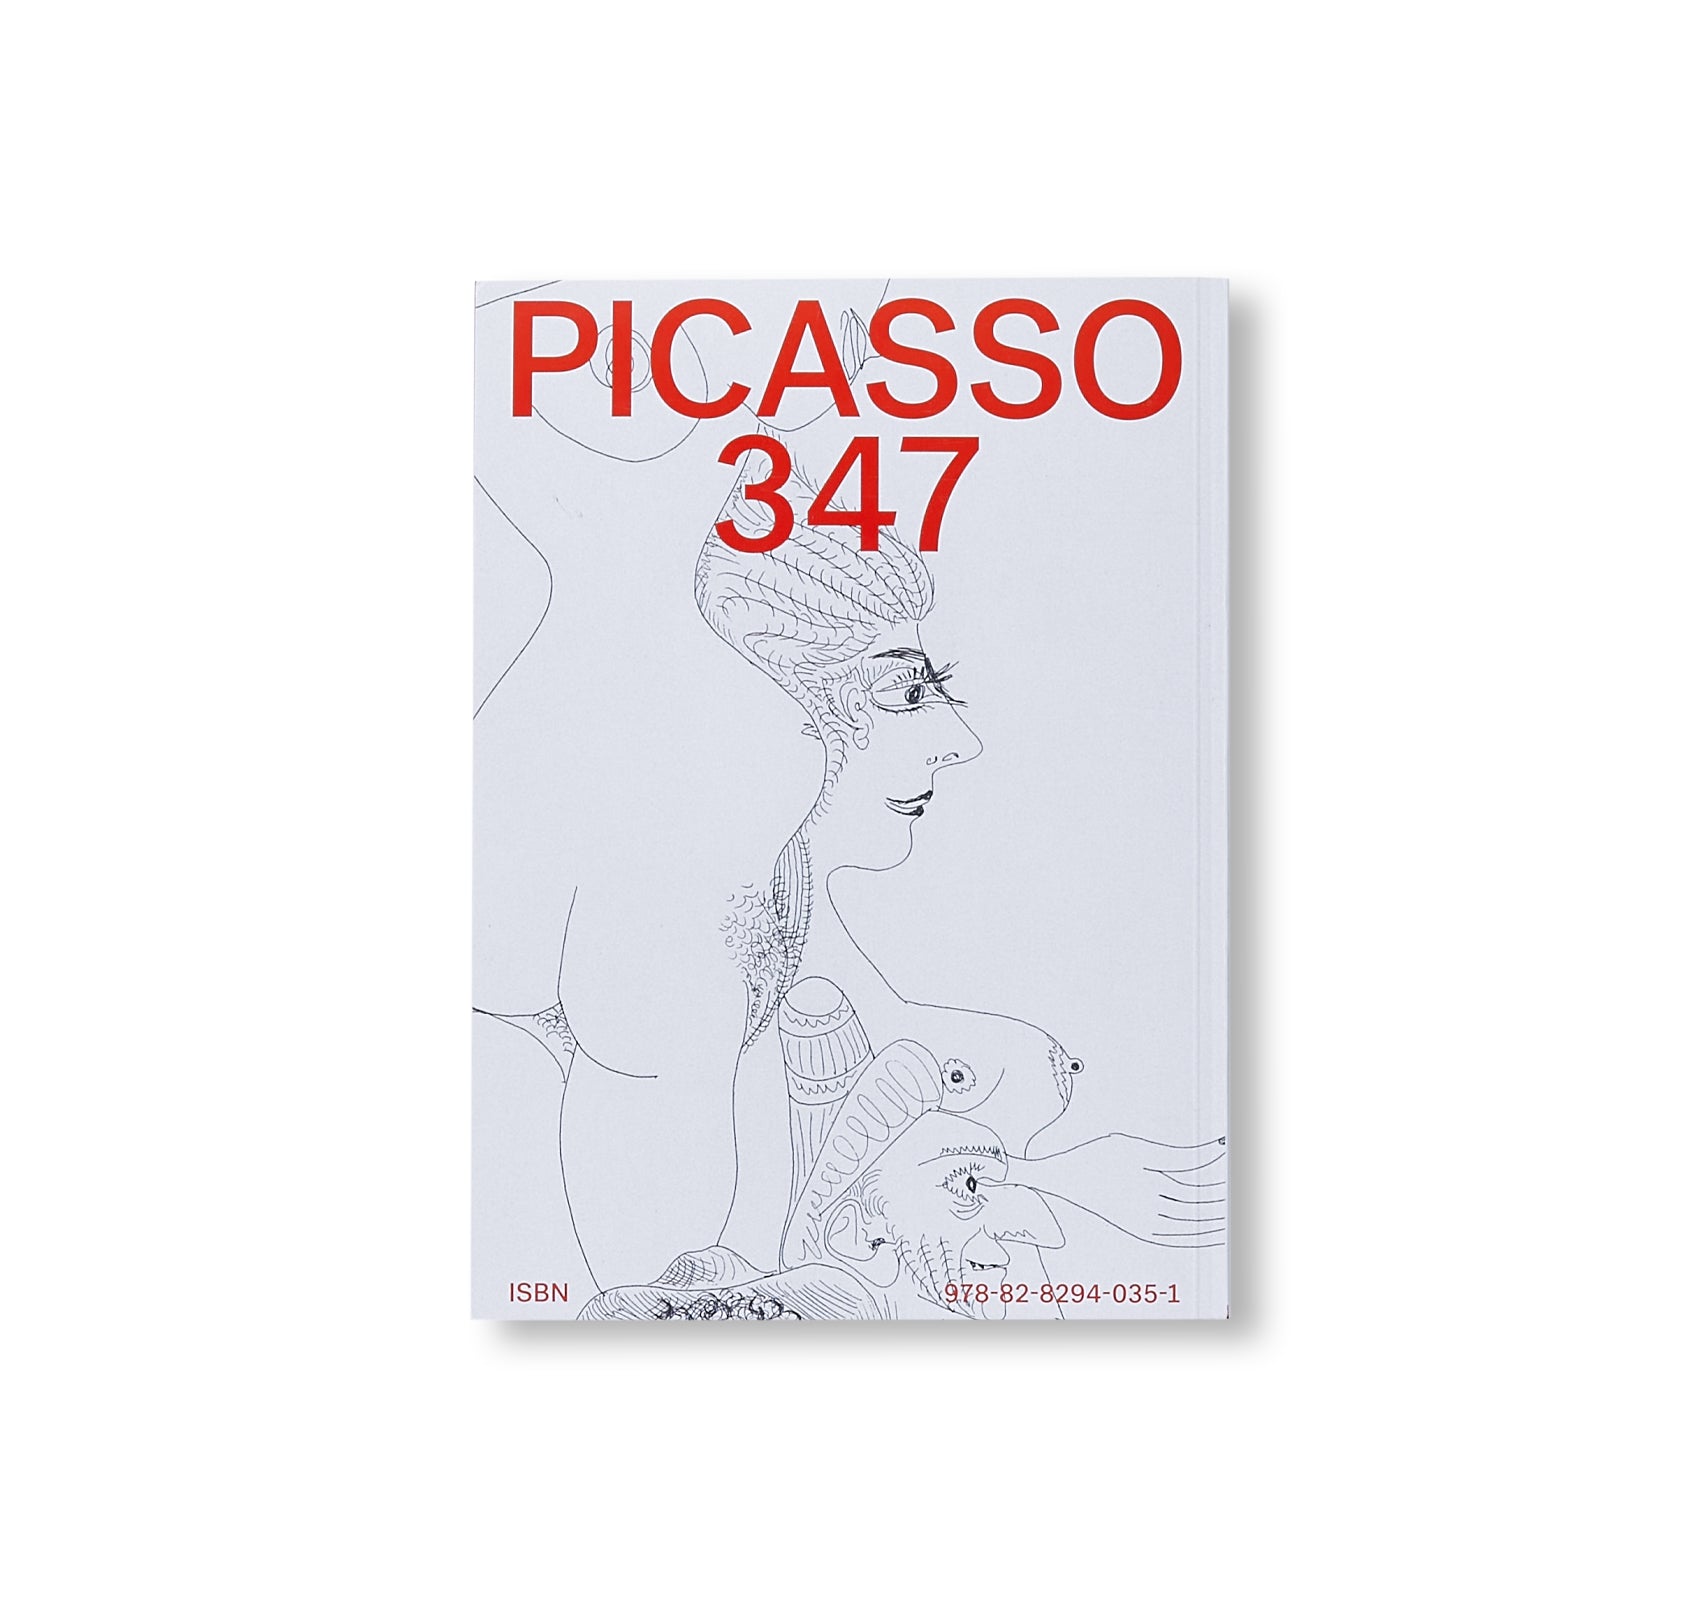 PICASSO 347 by Pablo Picasso